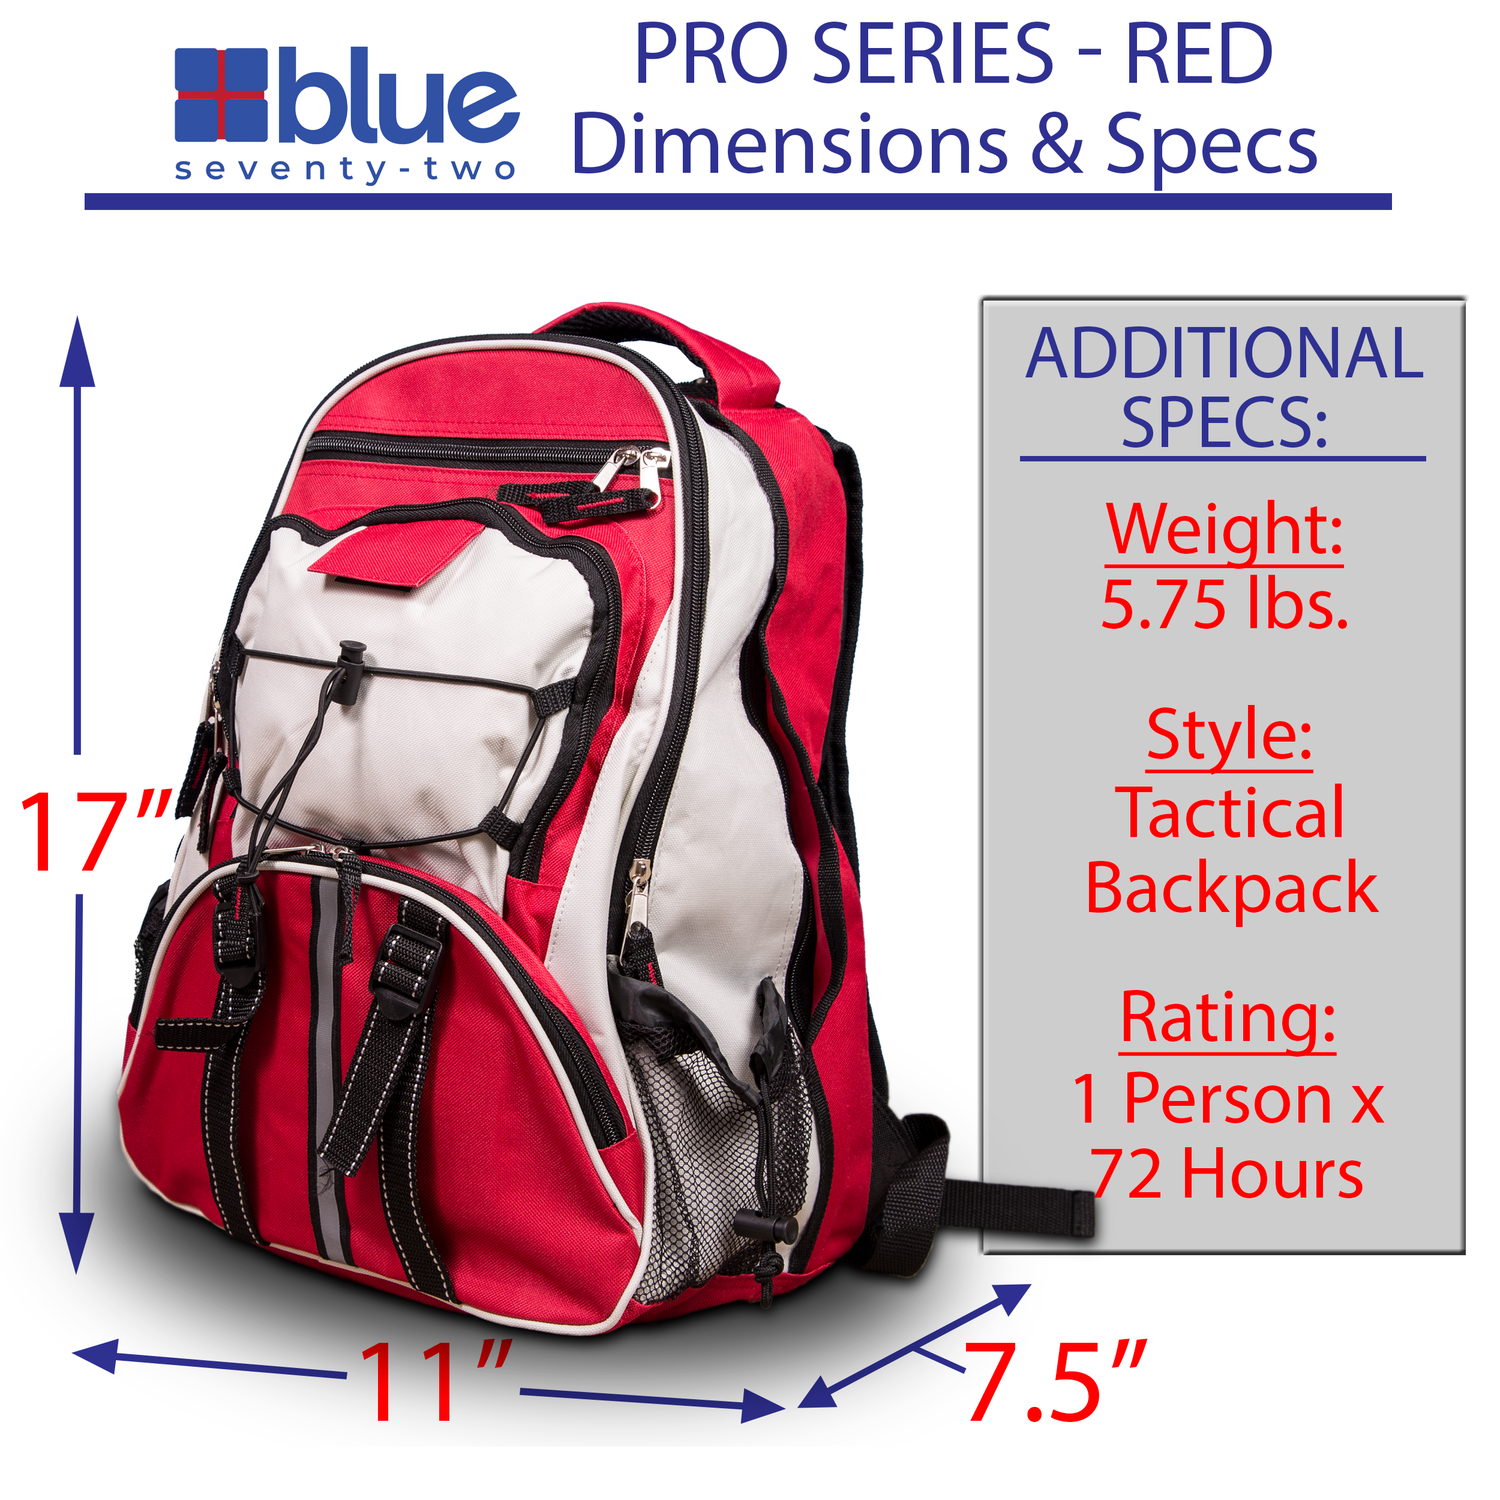 Blue Seventy-Two PRO SERIES Family Pack - Deluxe 3 Day Emergency Kit for 1 Person